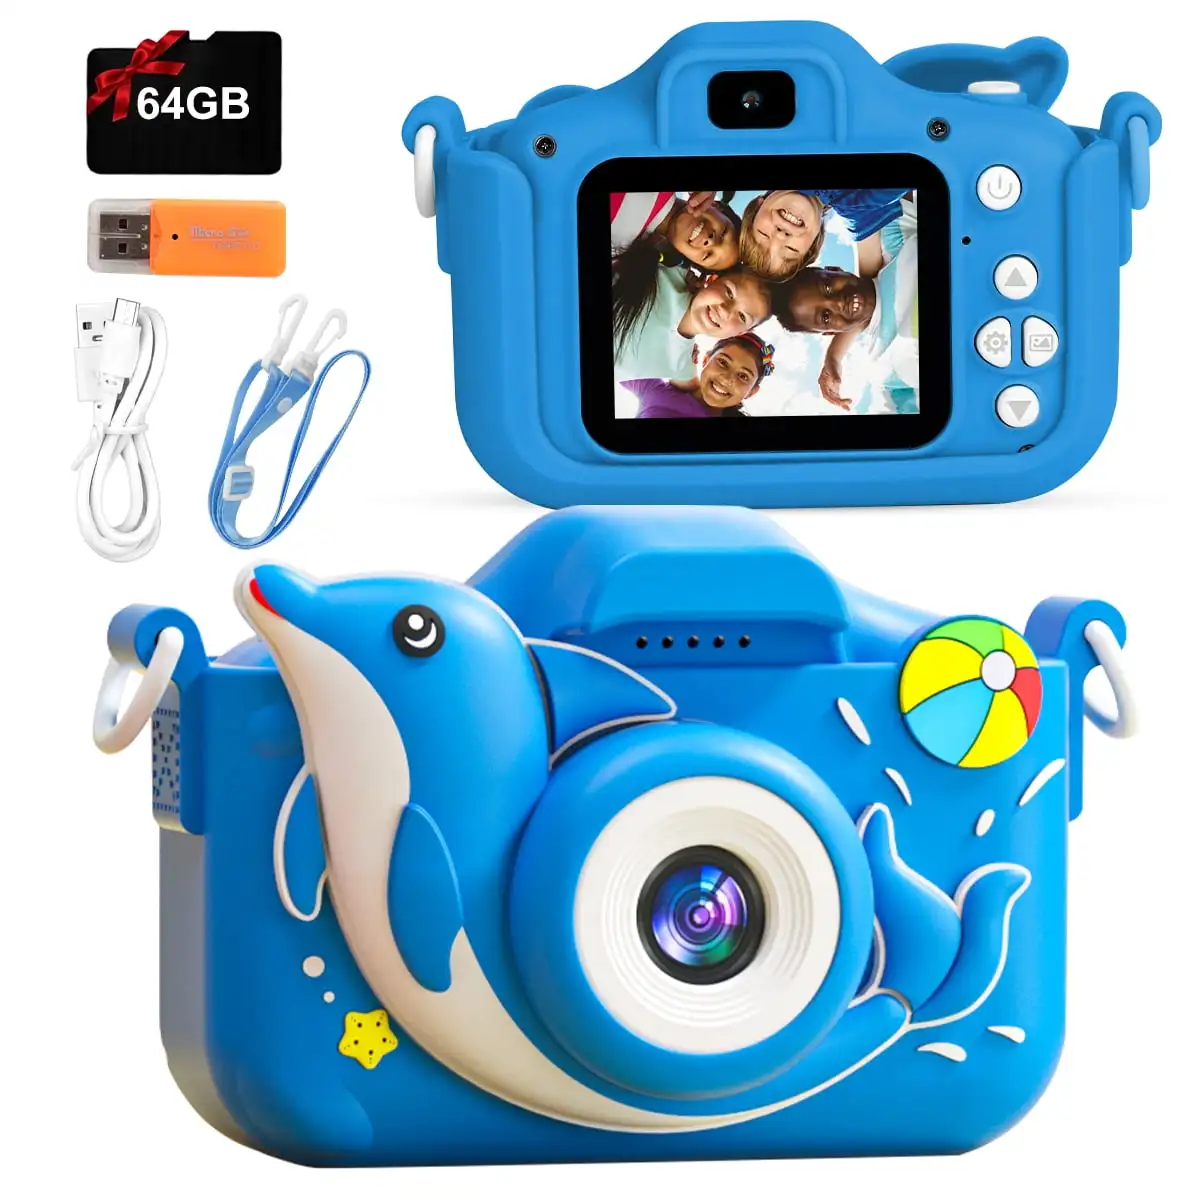 Artoon toys for toddler 1080p hd children camera with silicone cases christmas birthday thumb200